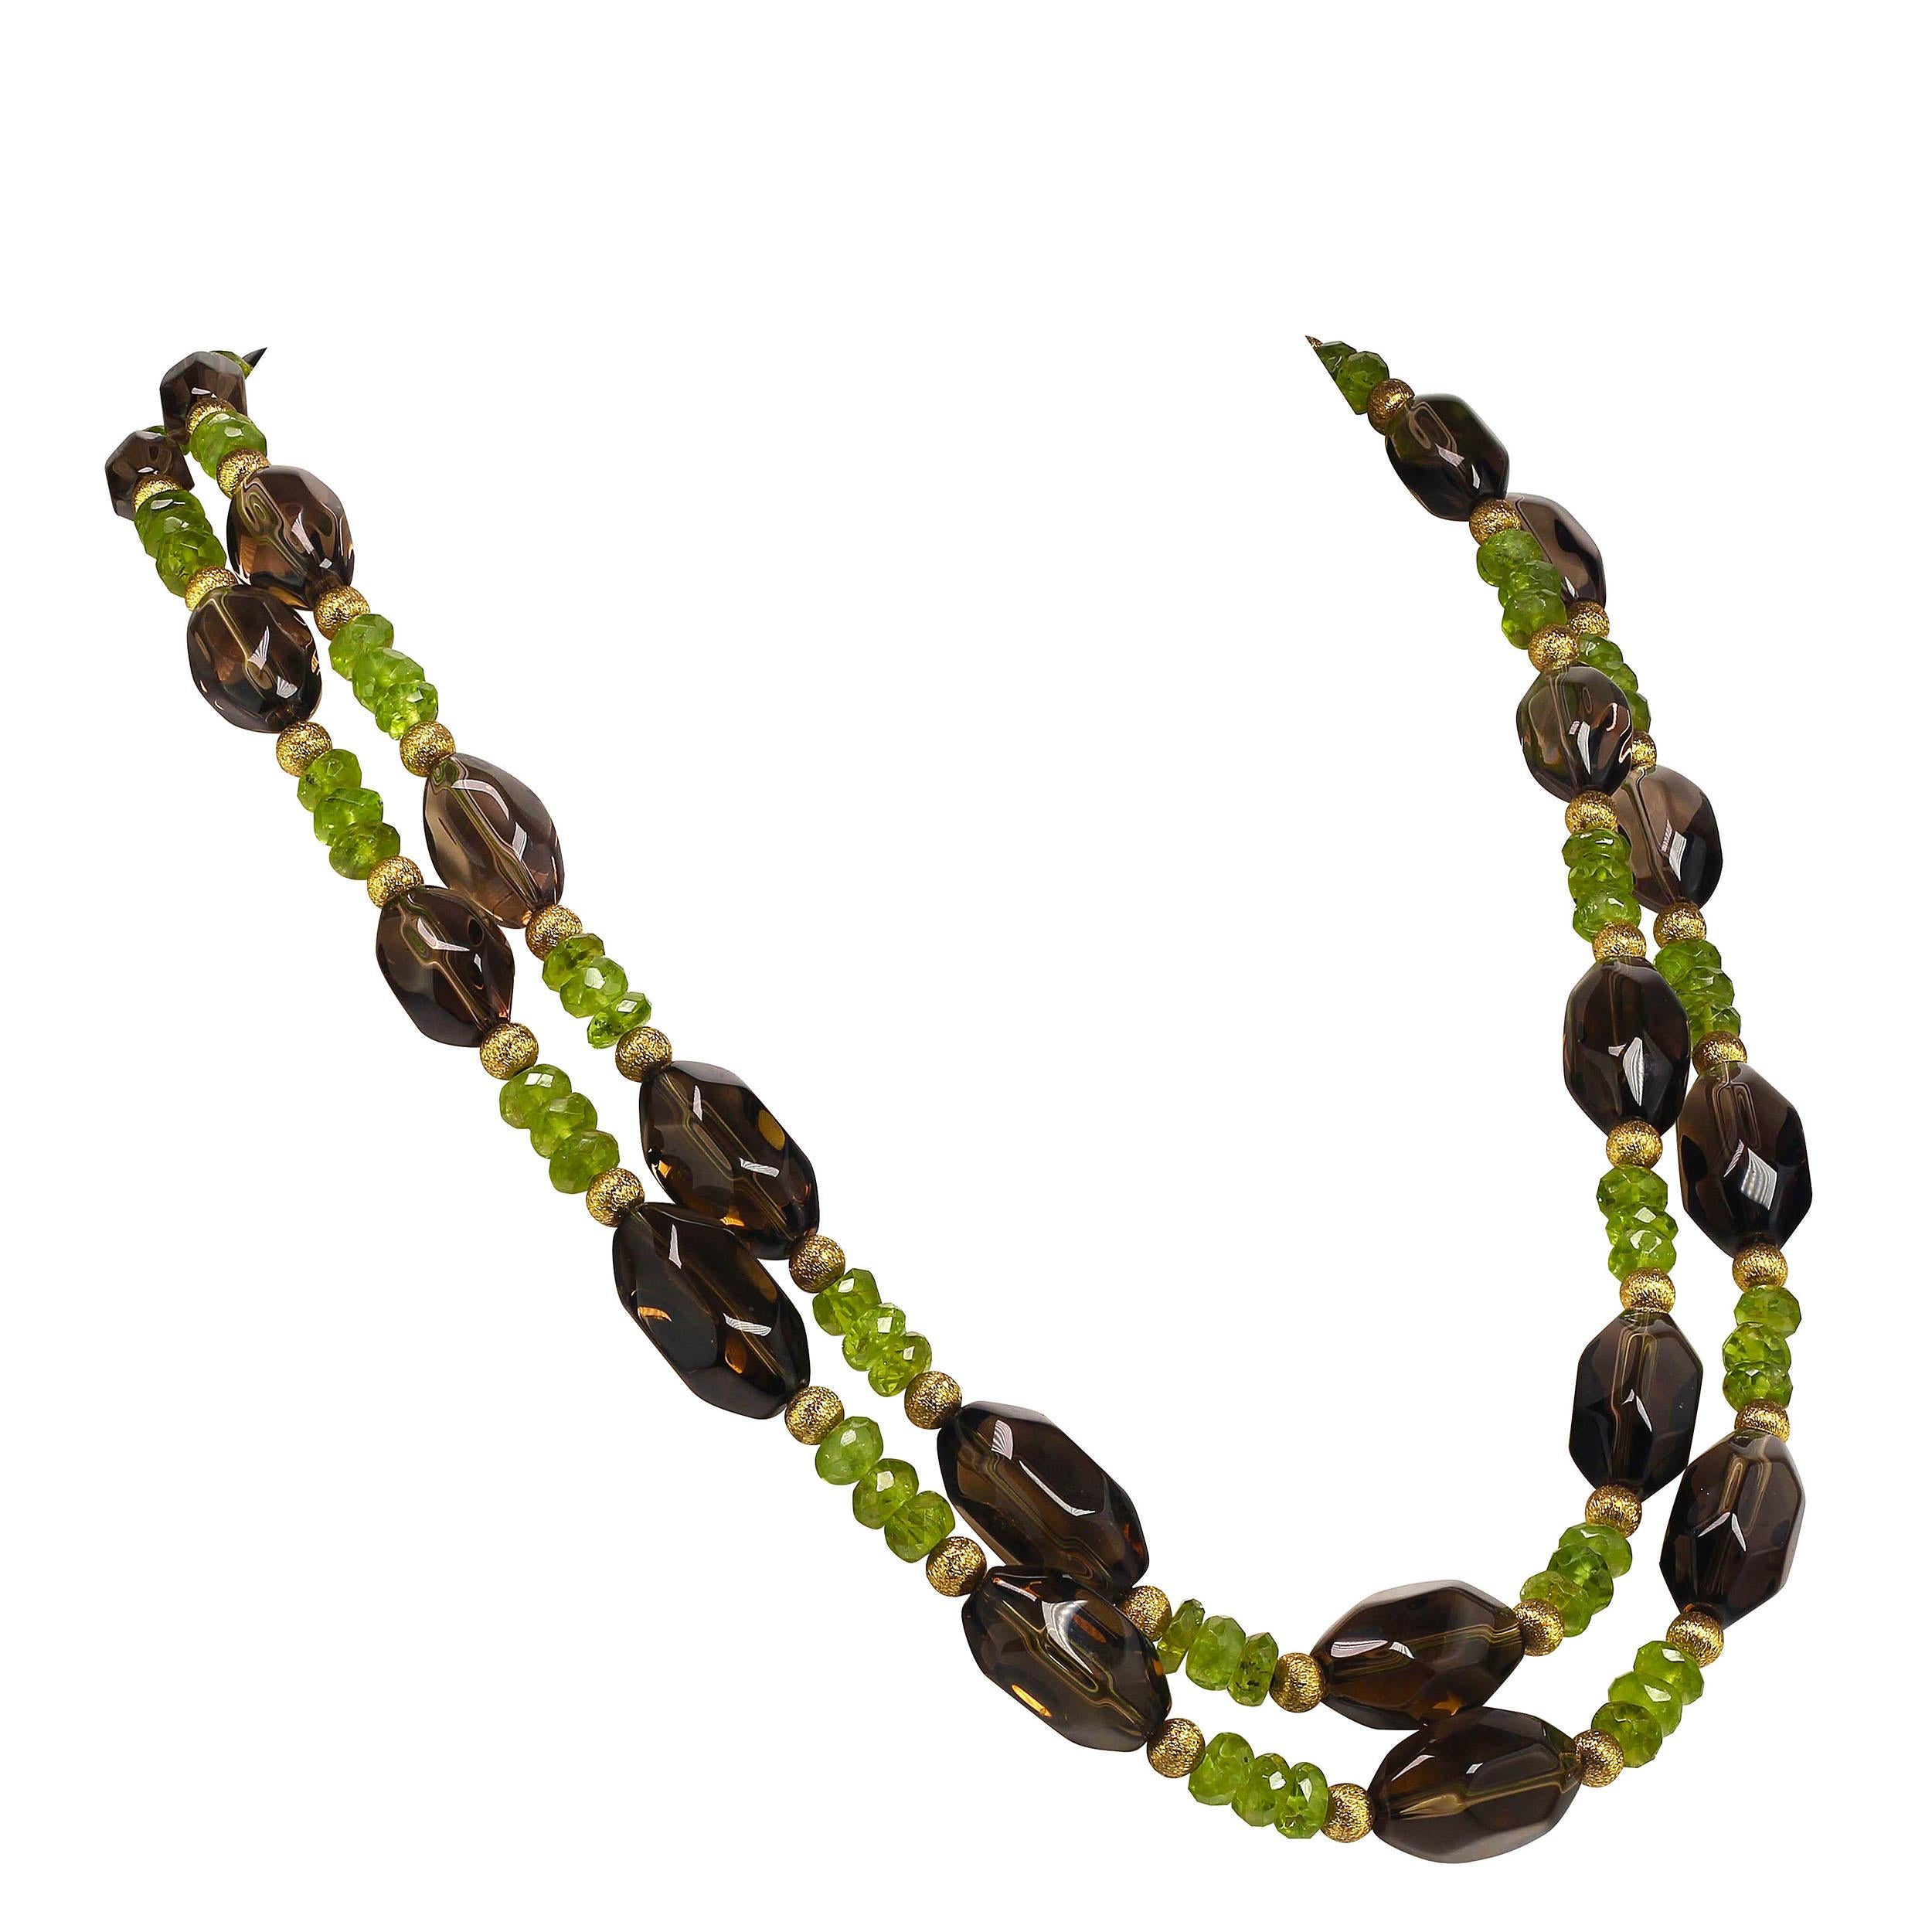 Elegant double strand necklace, 24 and 25 inches, of glowing Smoky Quartz and sparkling Peridot. The Smoky Quartz are three sizes graduating to the largest in front with etched goldy accents. The Peridot are all faceted rondelles. This double strand